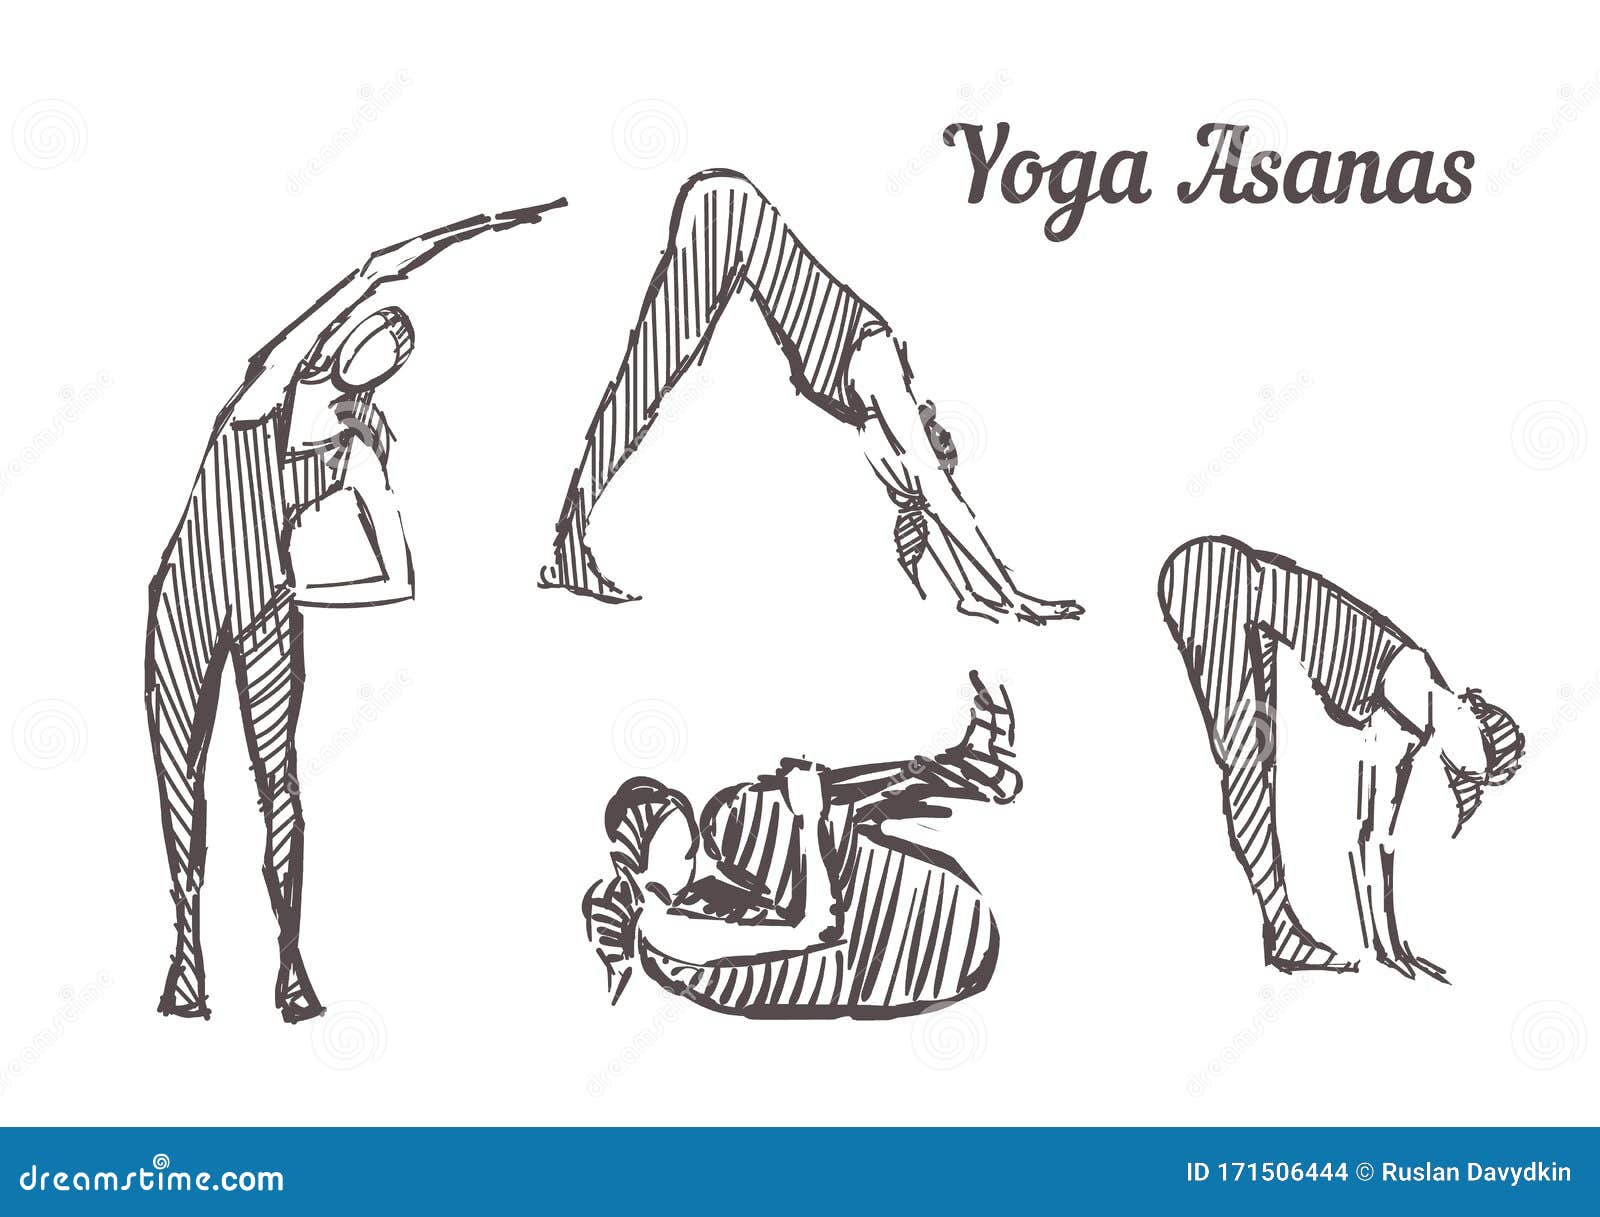 Sketch Commission - Yoga pose by ShaneMadeArt on DeviantArt